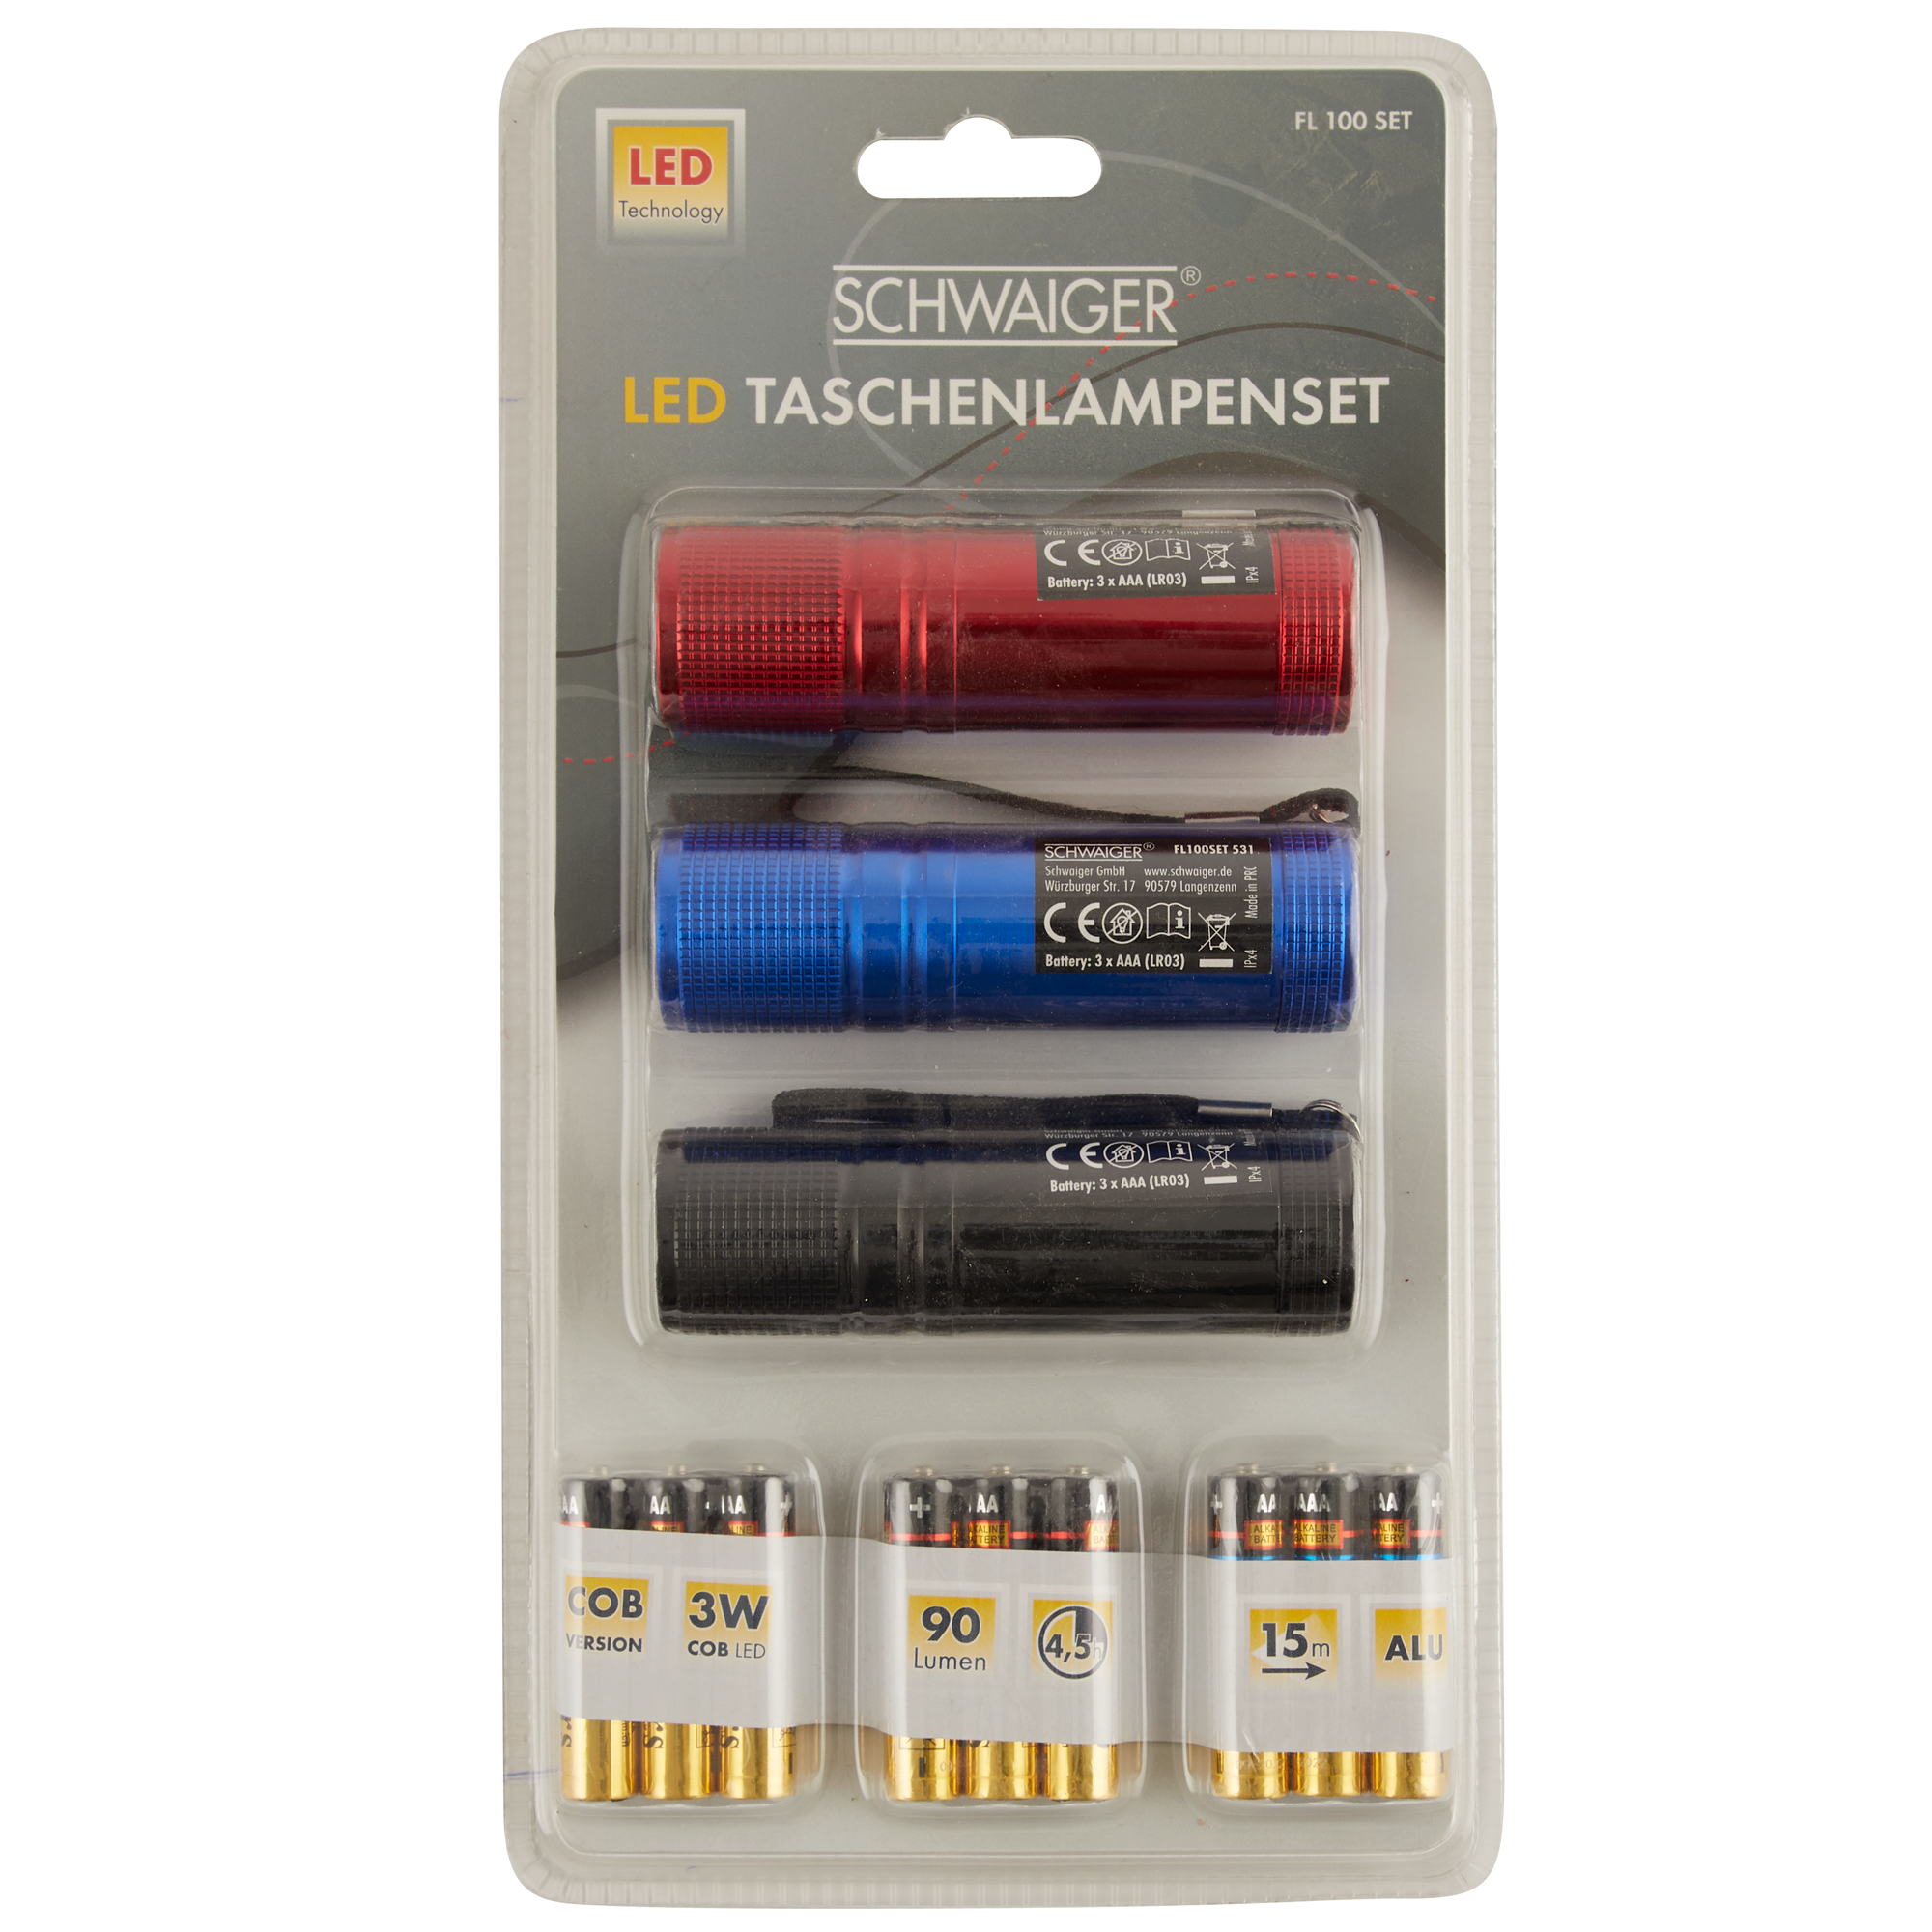 LED Taschenlampenset 3-Stück + product picture